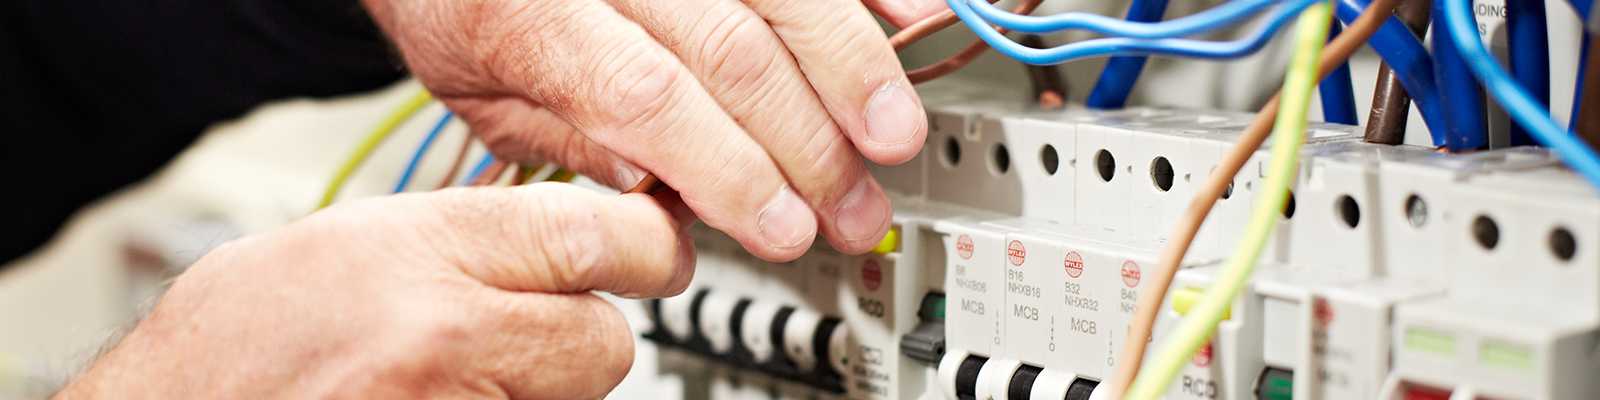 City & Guilds Level 2 Electrical Course